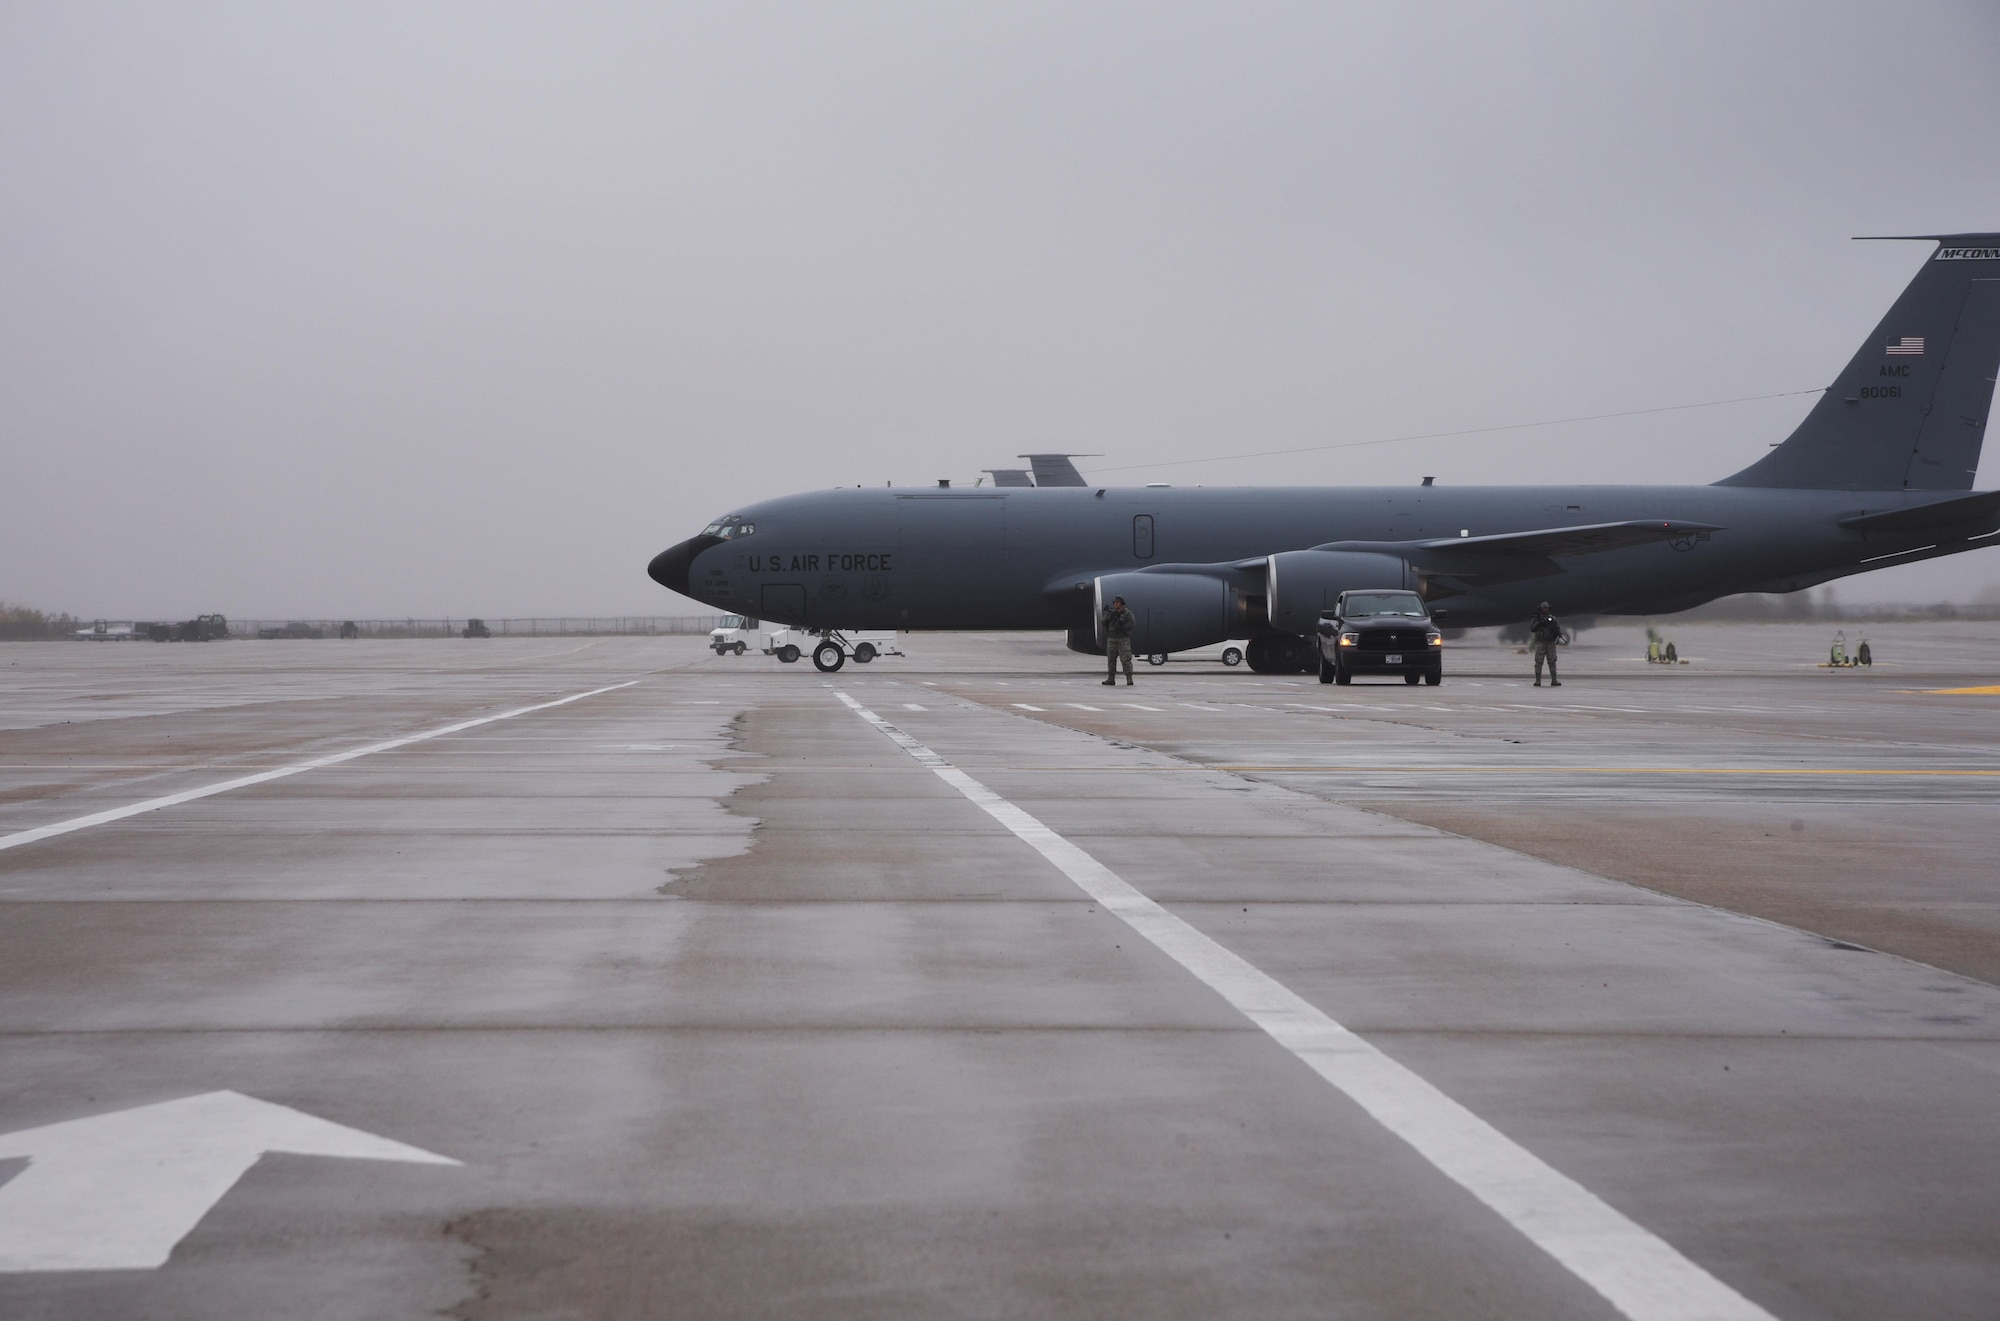 A KC-135 Stratotanker taxis prior to take-off during Exercise Global Thunder 2018 Nov. 4, at McConnell Air Force Base, Kan. U.S. Strategic Command has executed Global Thunder annually since 2005. (U.S. Air Force photo by Amn Michaela R. Slanchik)